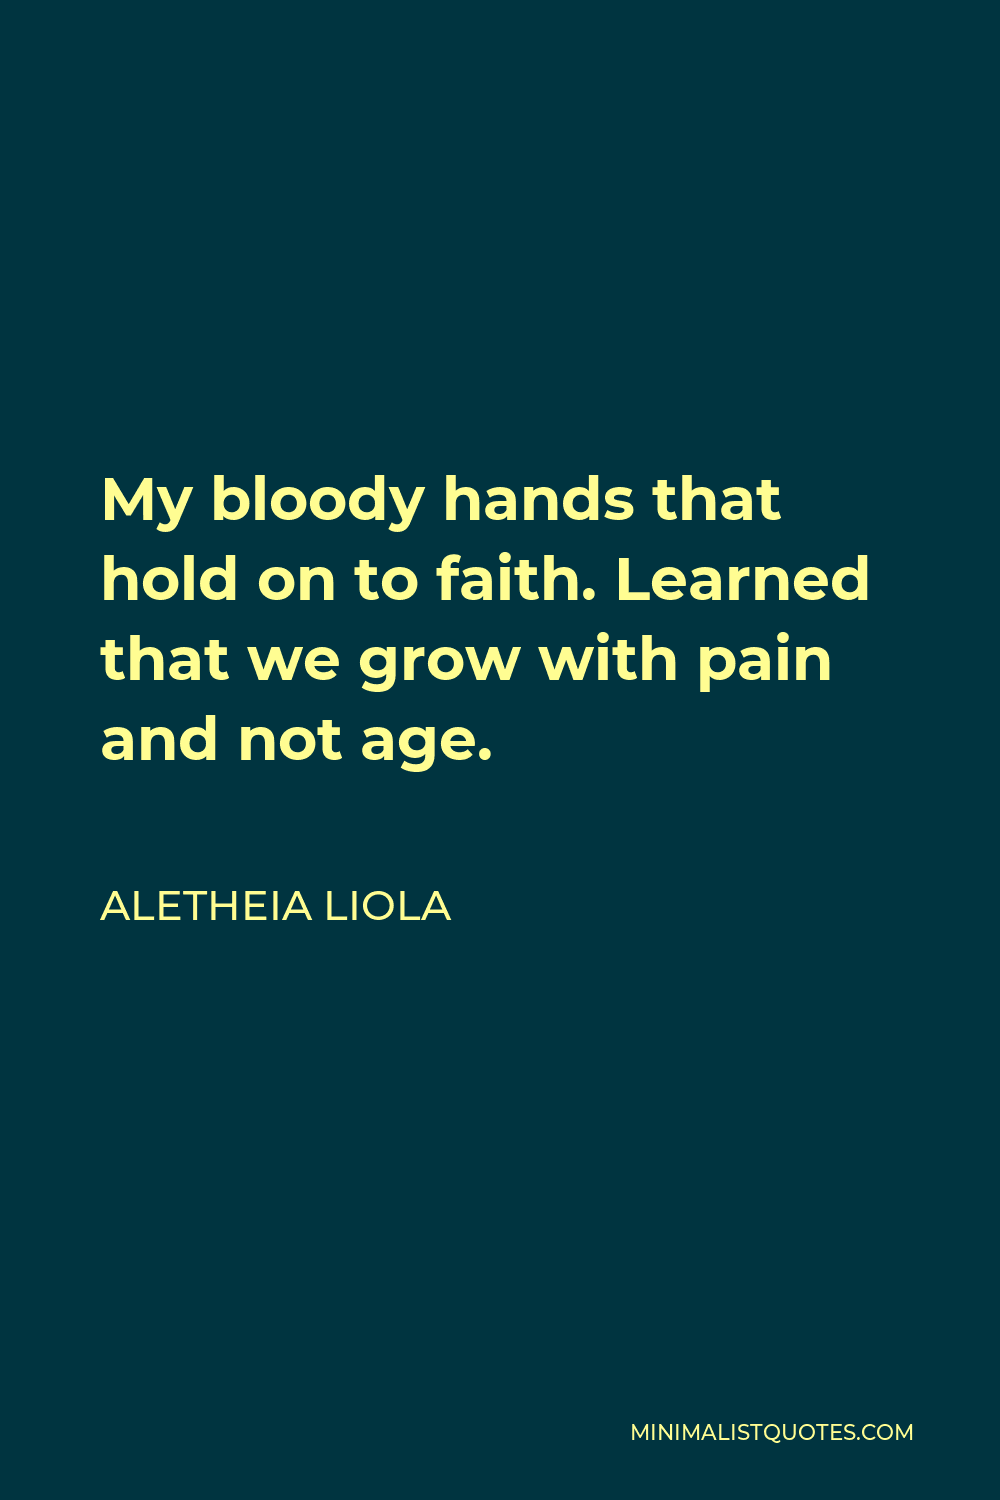 Aletheia Liola Quote - My bloody hands that hold on to faith. Learned that we grow with pain and not age.